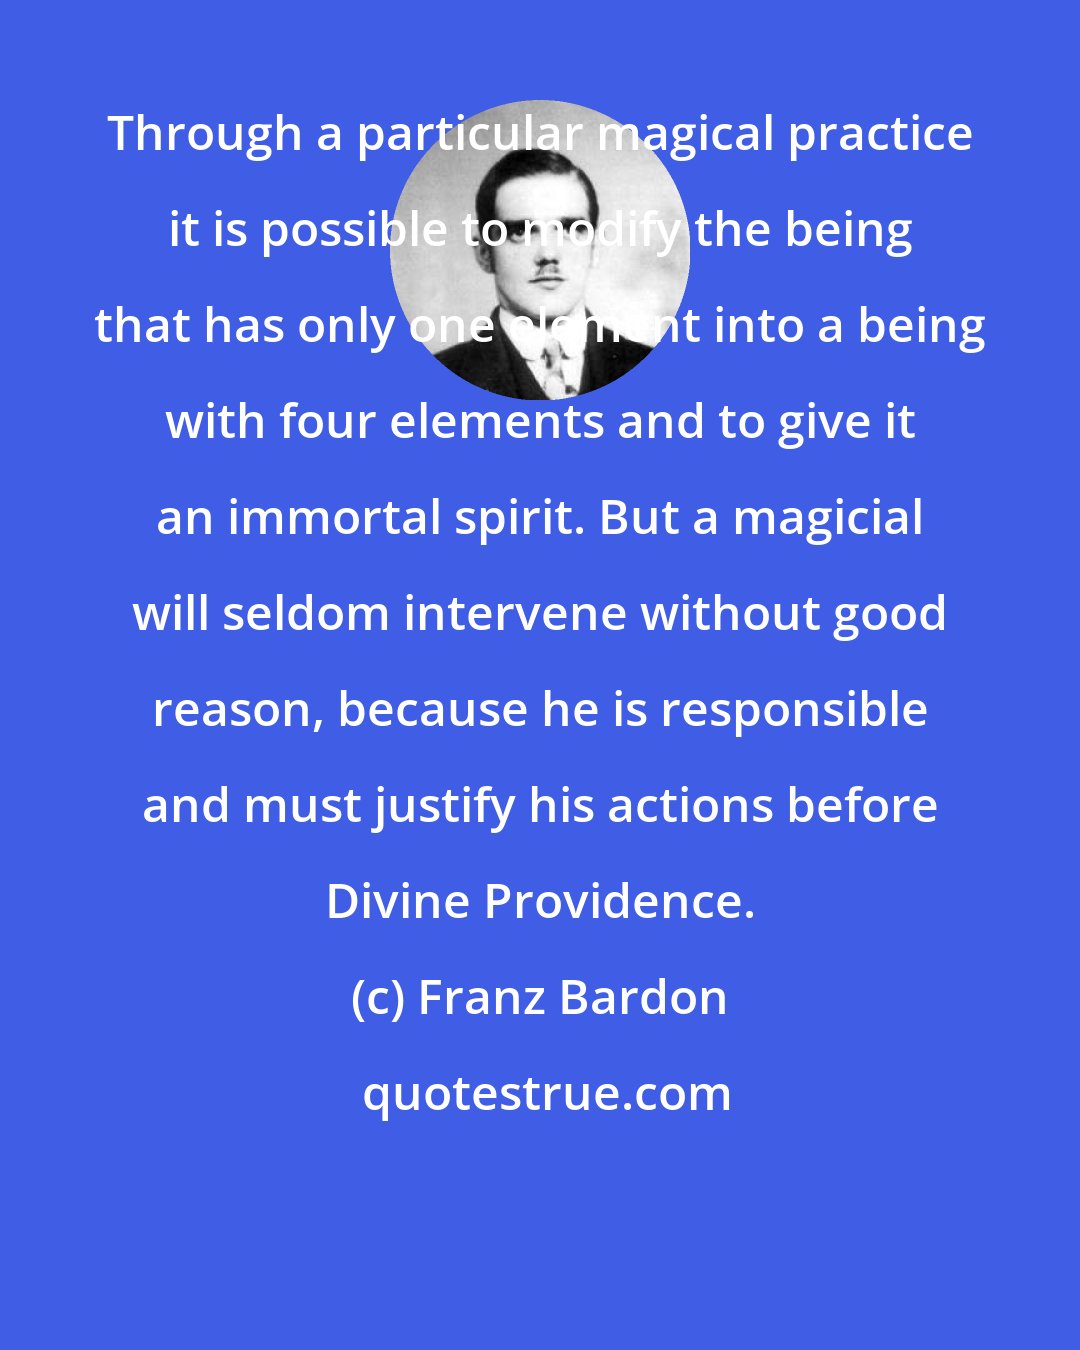 Franz Bardon: Through a particular magical practice it is possible to modify the being that has only one element into a being with four elements and to give it an immortal spirit. But a magicial will seldom intervene without good reason, because he is responsible and must justify his actions before Divine Providence.